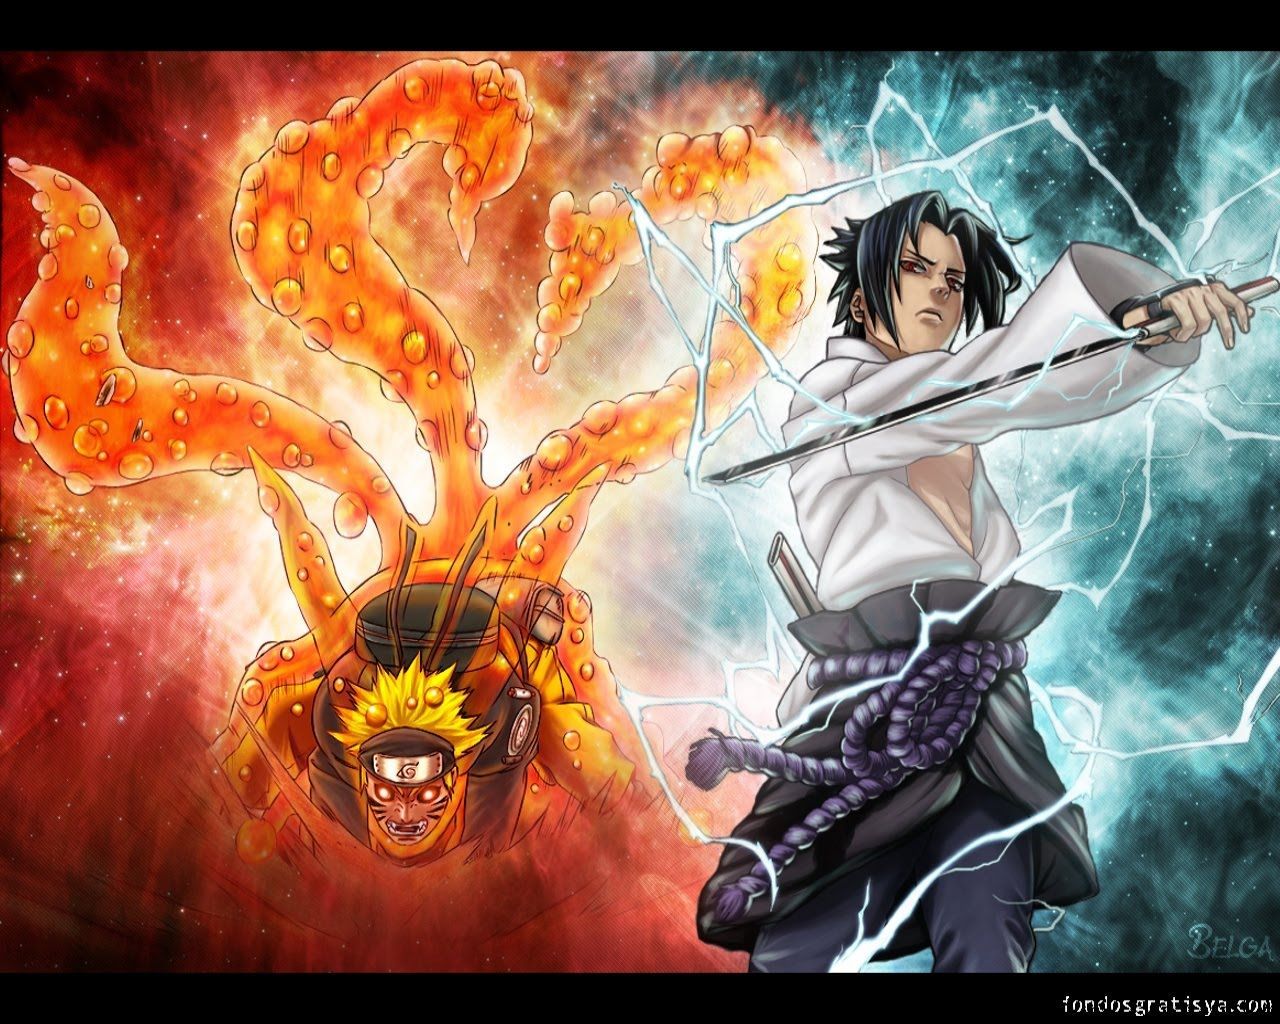 Download Naruto Sage Free Wallpaper 1280x1024 Full HD Backgrounds